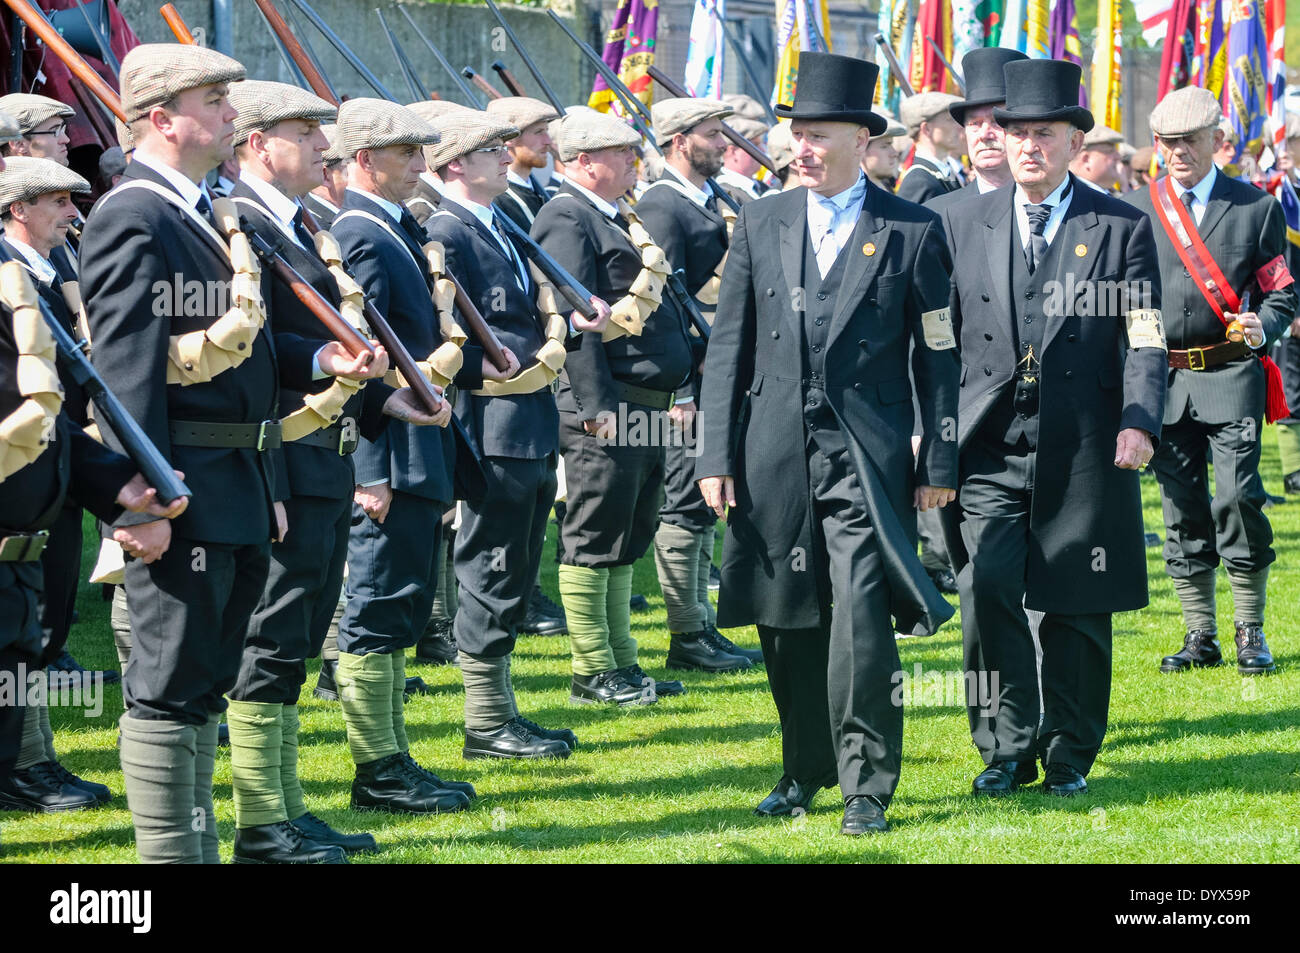 Larne, Northern Ireland. 26 Apr 2014 -  Lord Edward Carson (PUP leader Billy Hutchinson) inspects the UVF troops during a re-enactment of the 1914 Larne gun-running with Nigel Gardiner (R) and Ken Wilkinson (behind). Credit:  Stephen Barnes/Alamy Live News Stock Photo